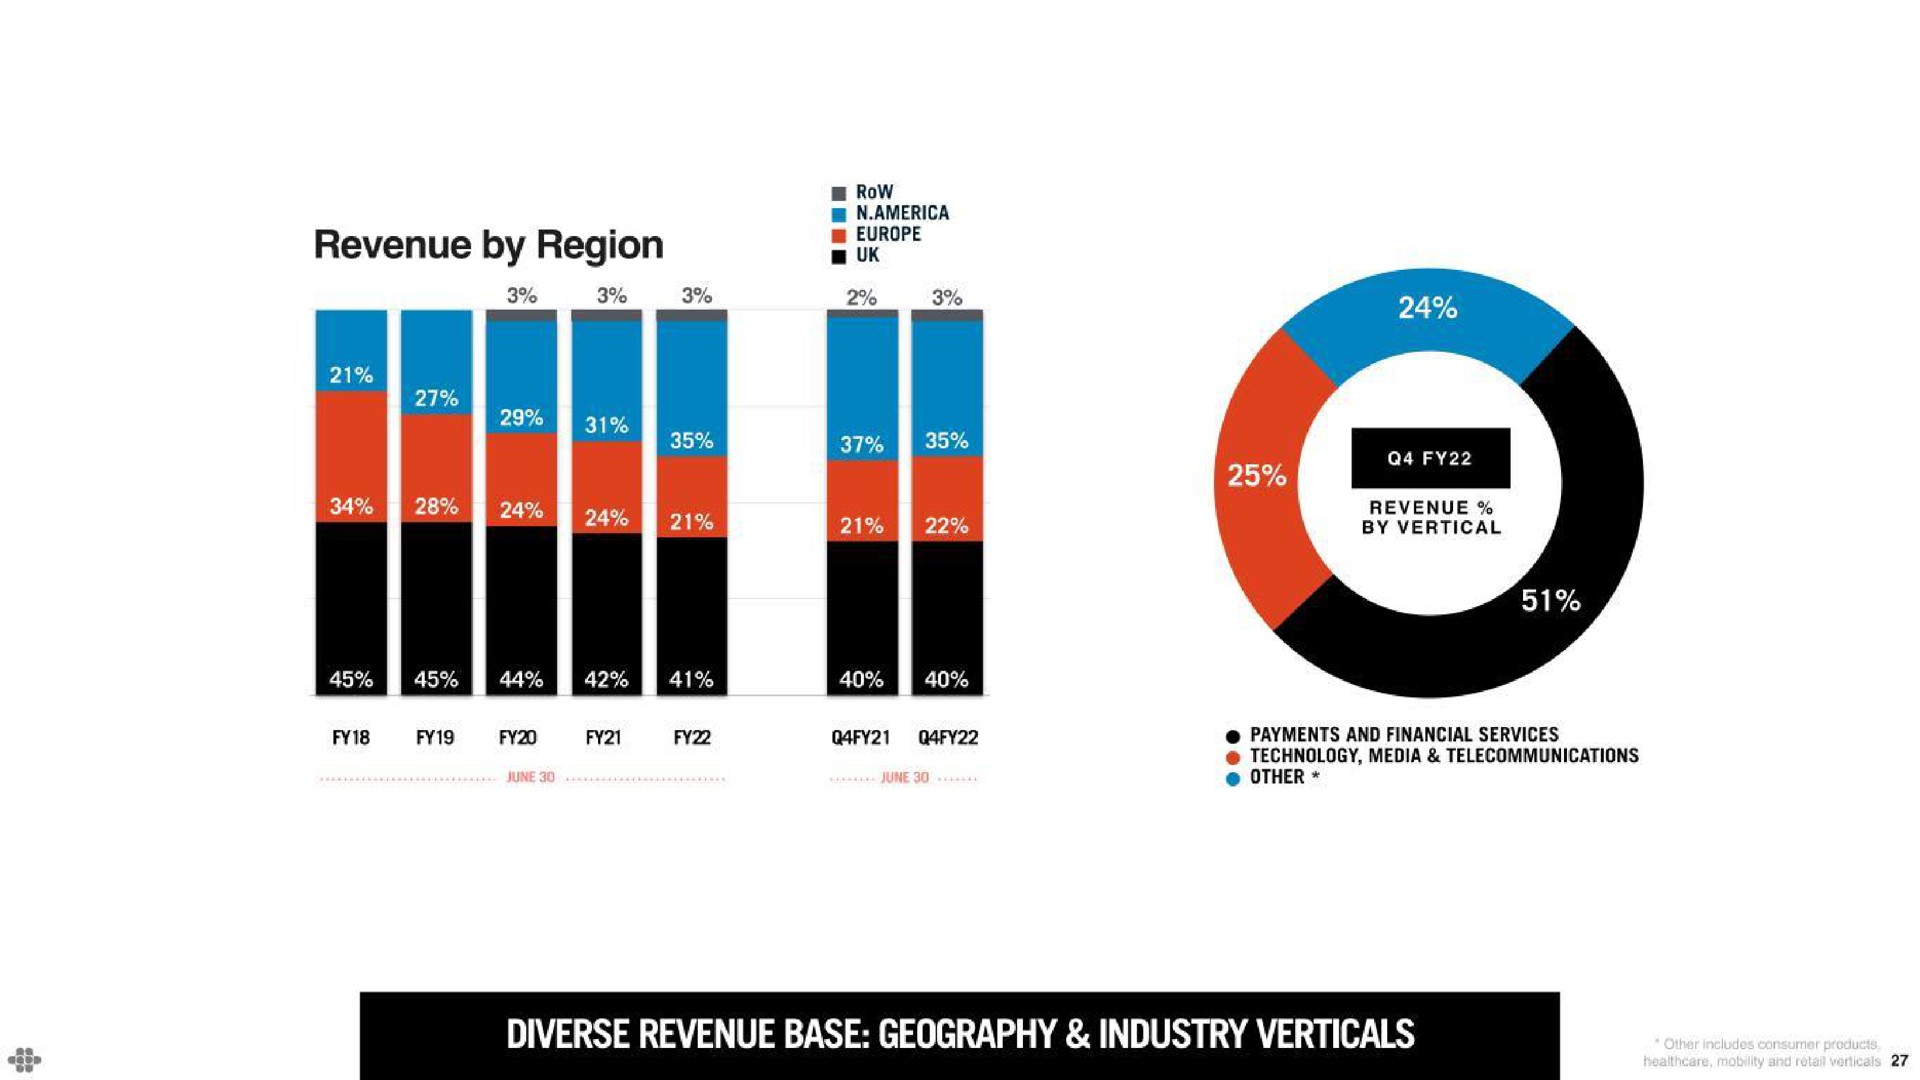 revenue by region row a oes revenue by vertical payments and financial services technology media telecommunications other as diverse revenue base geography industry verticals | Endava